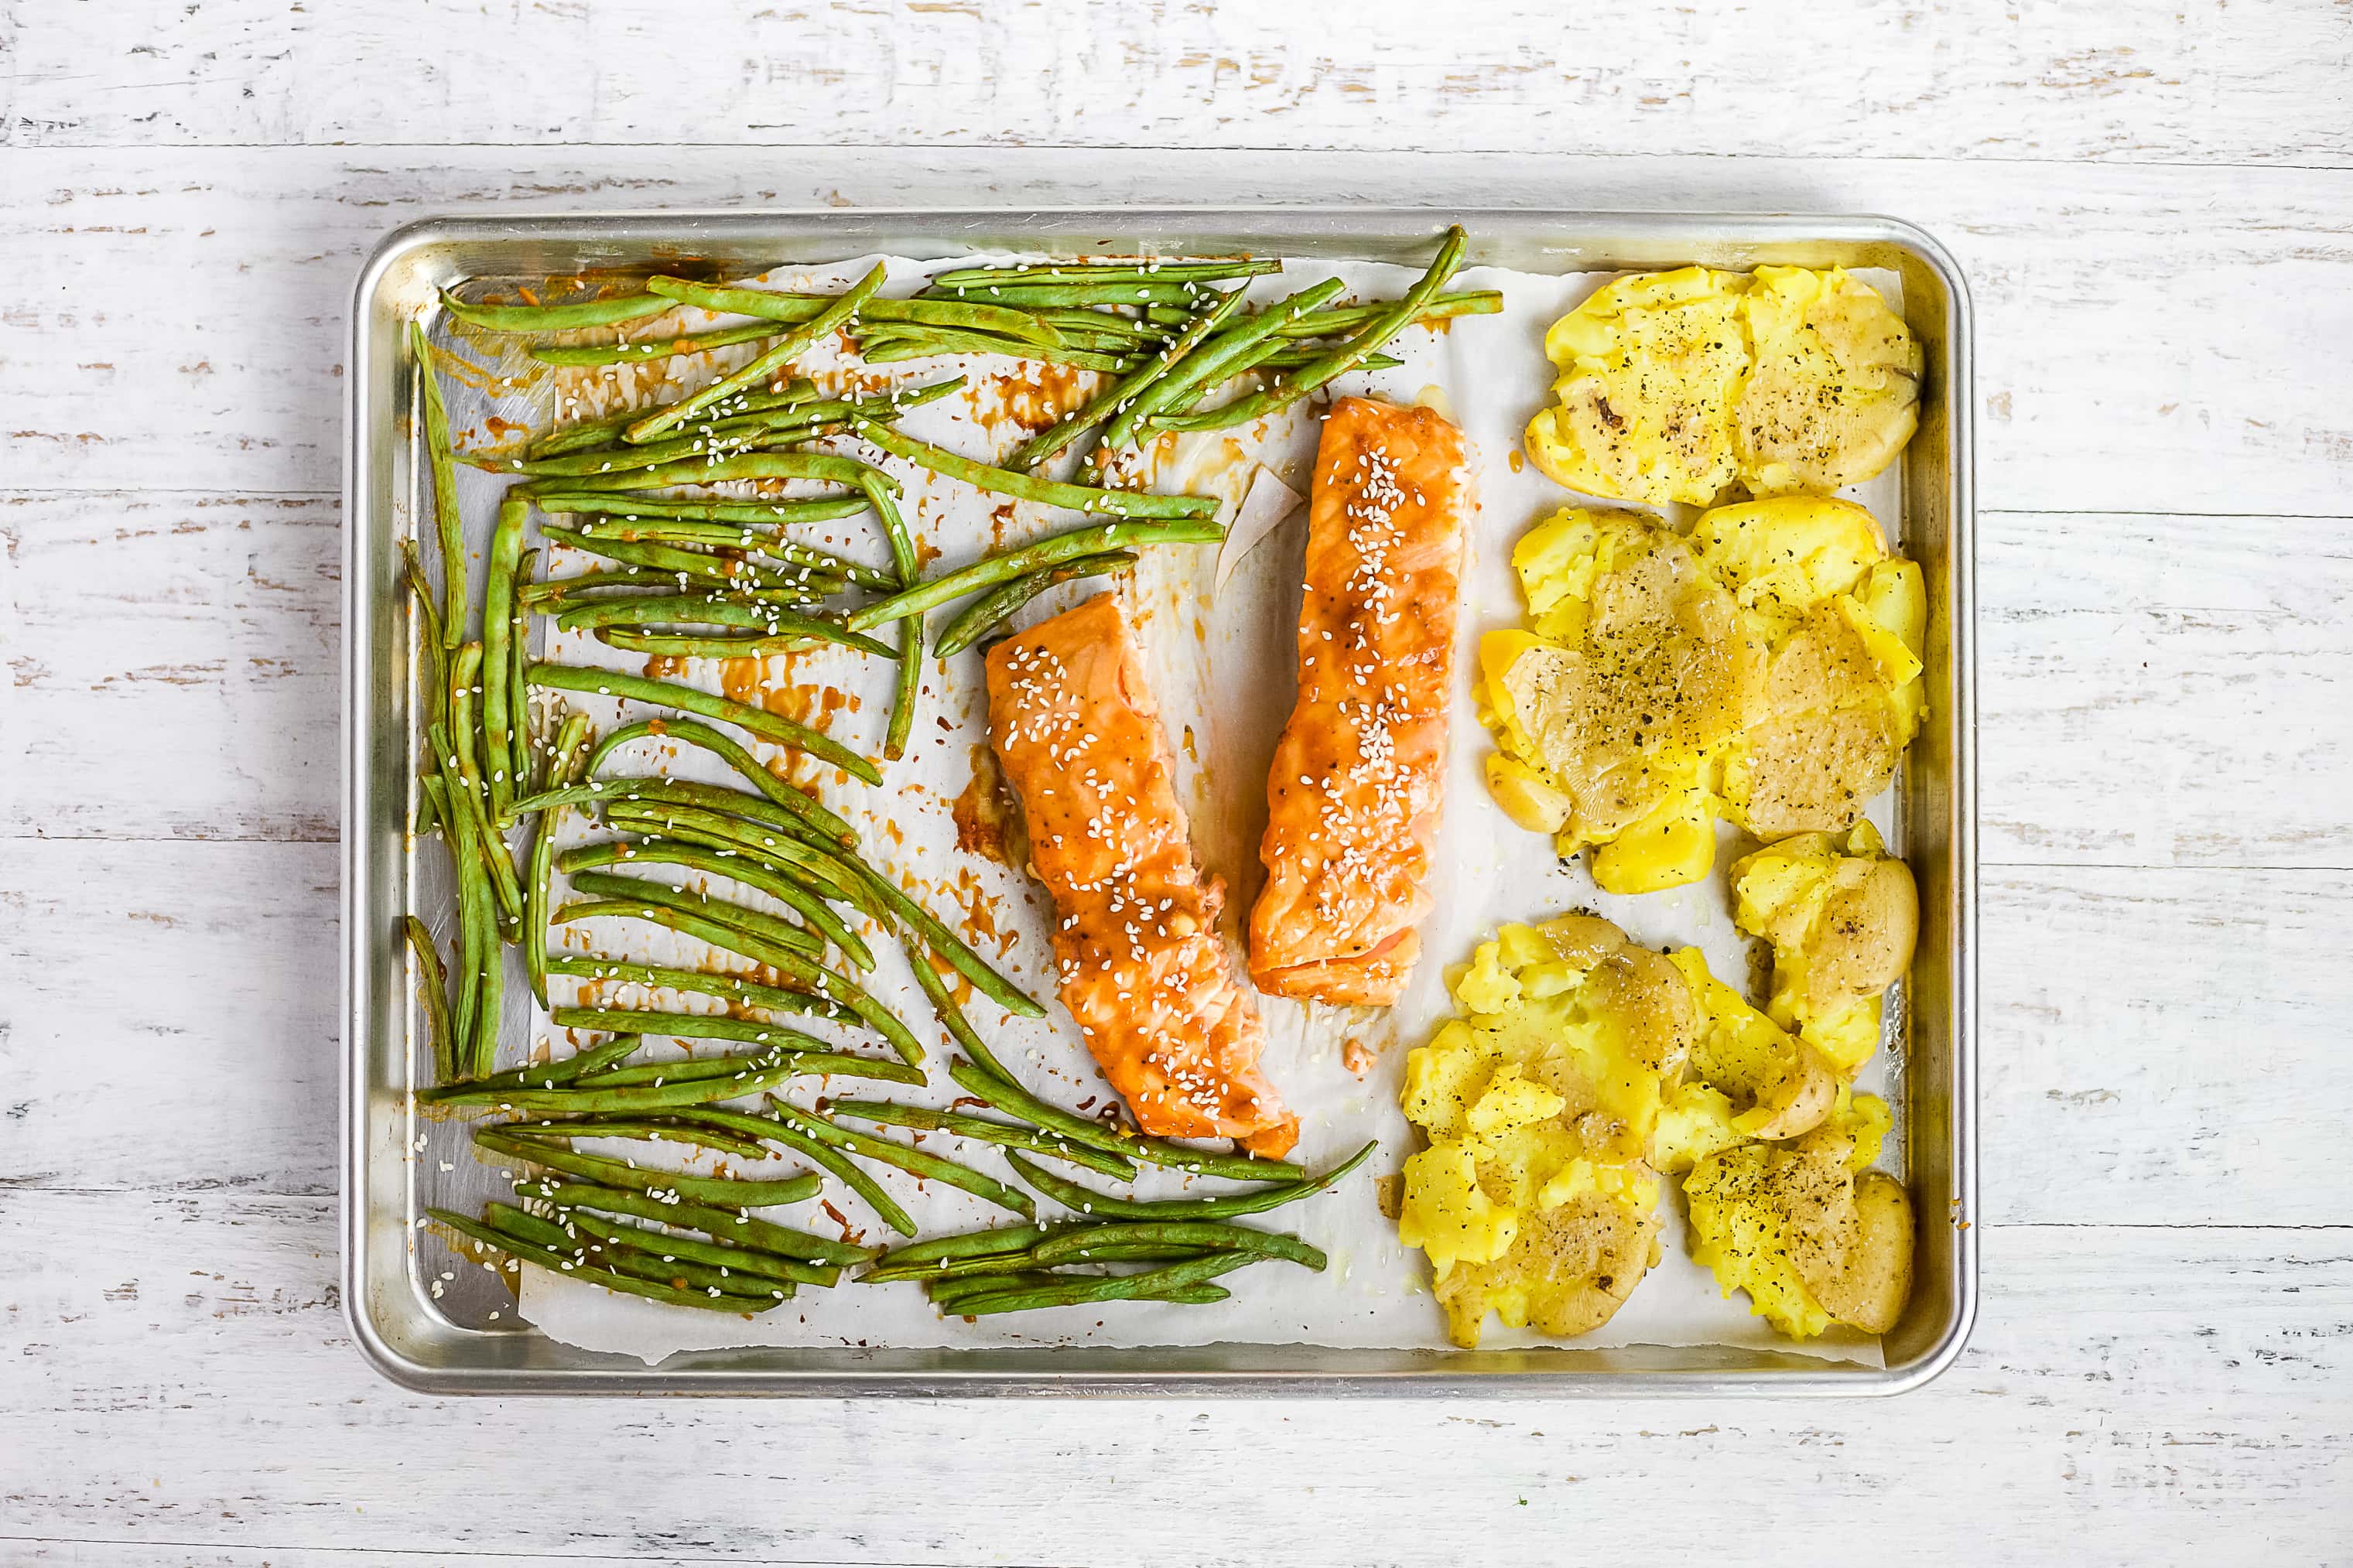 20 Meal Ideas to Support Your Clients Oral Health:One Pan Salmon, Green Beans & Smashed Potatoes